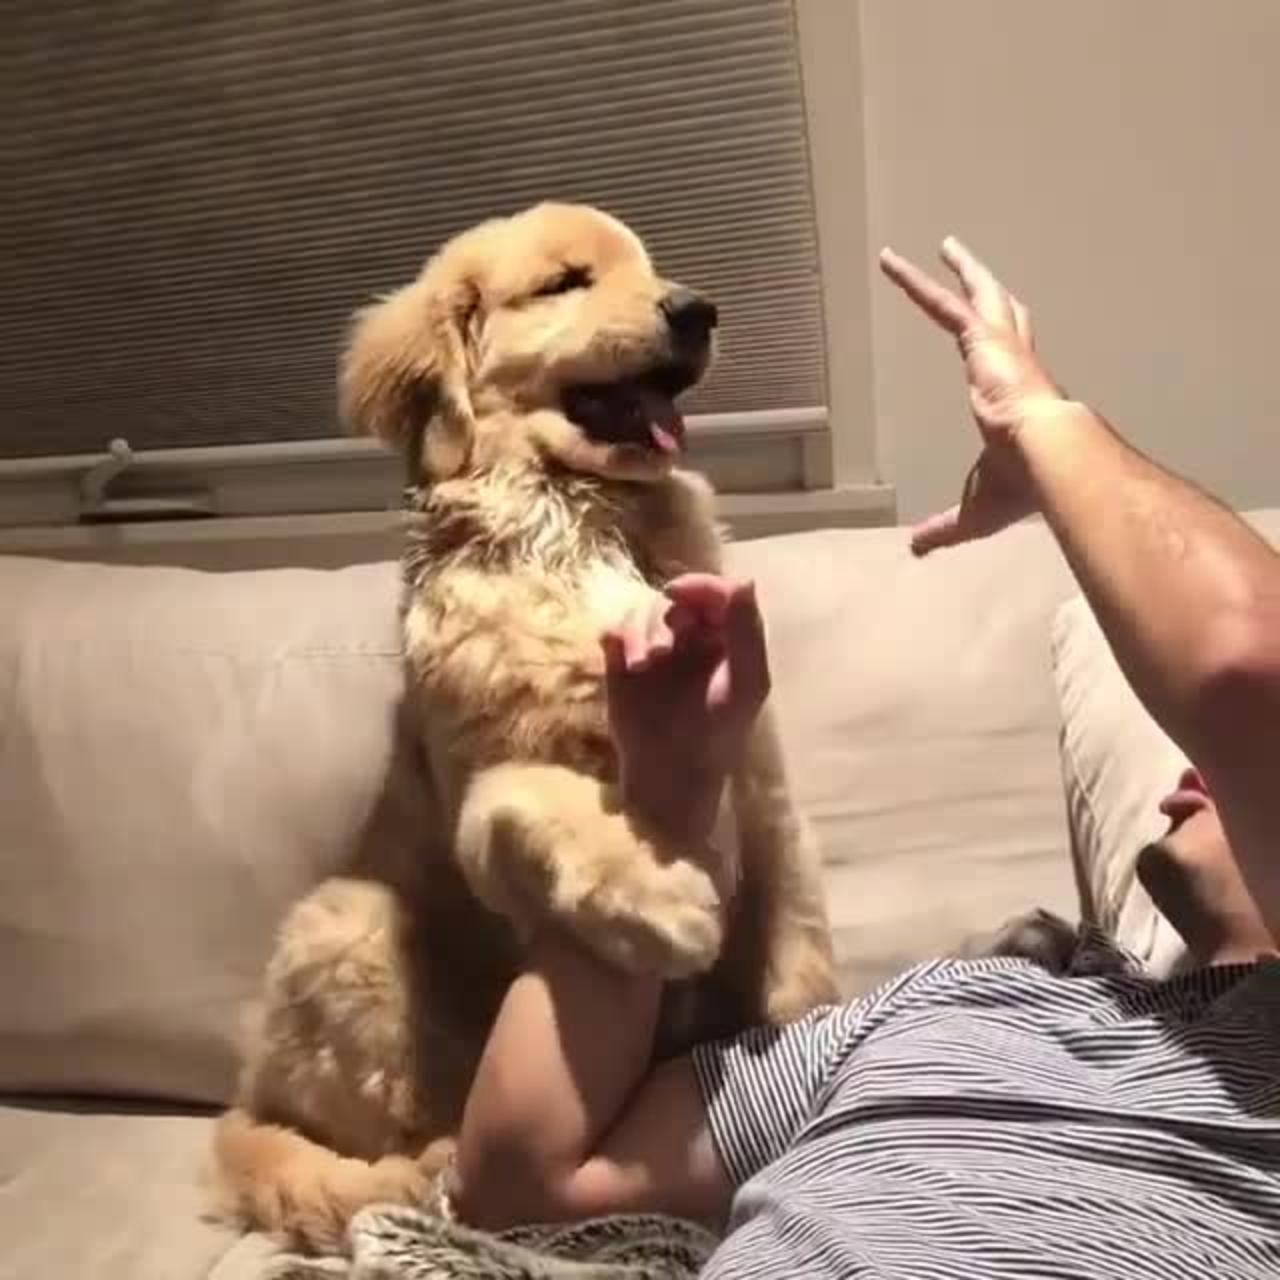 A dog that plays games with its master